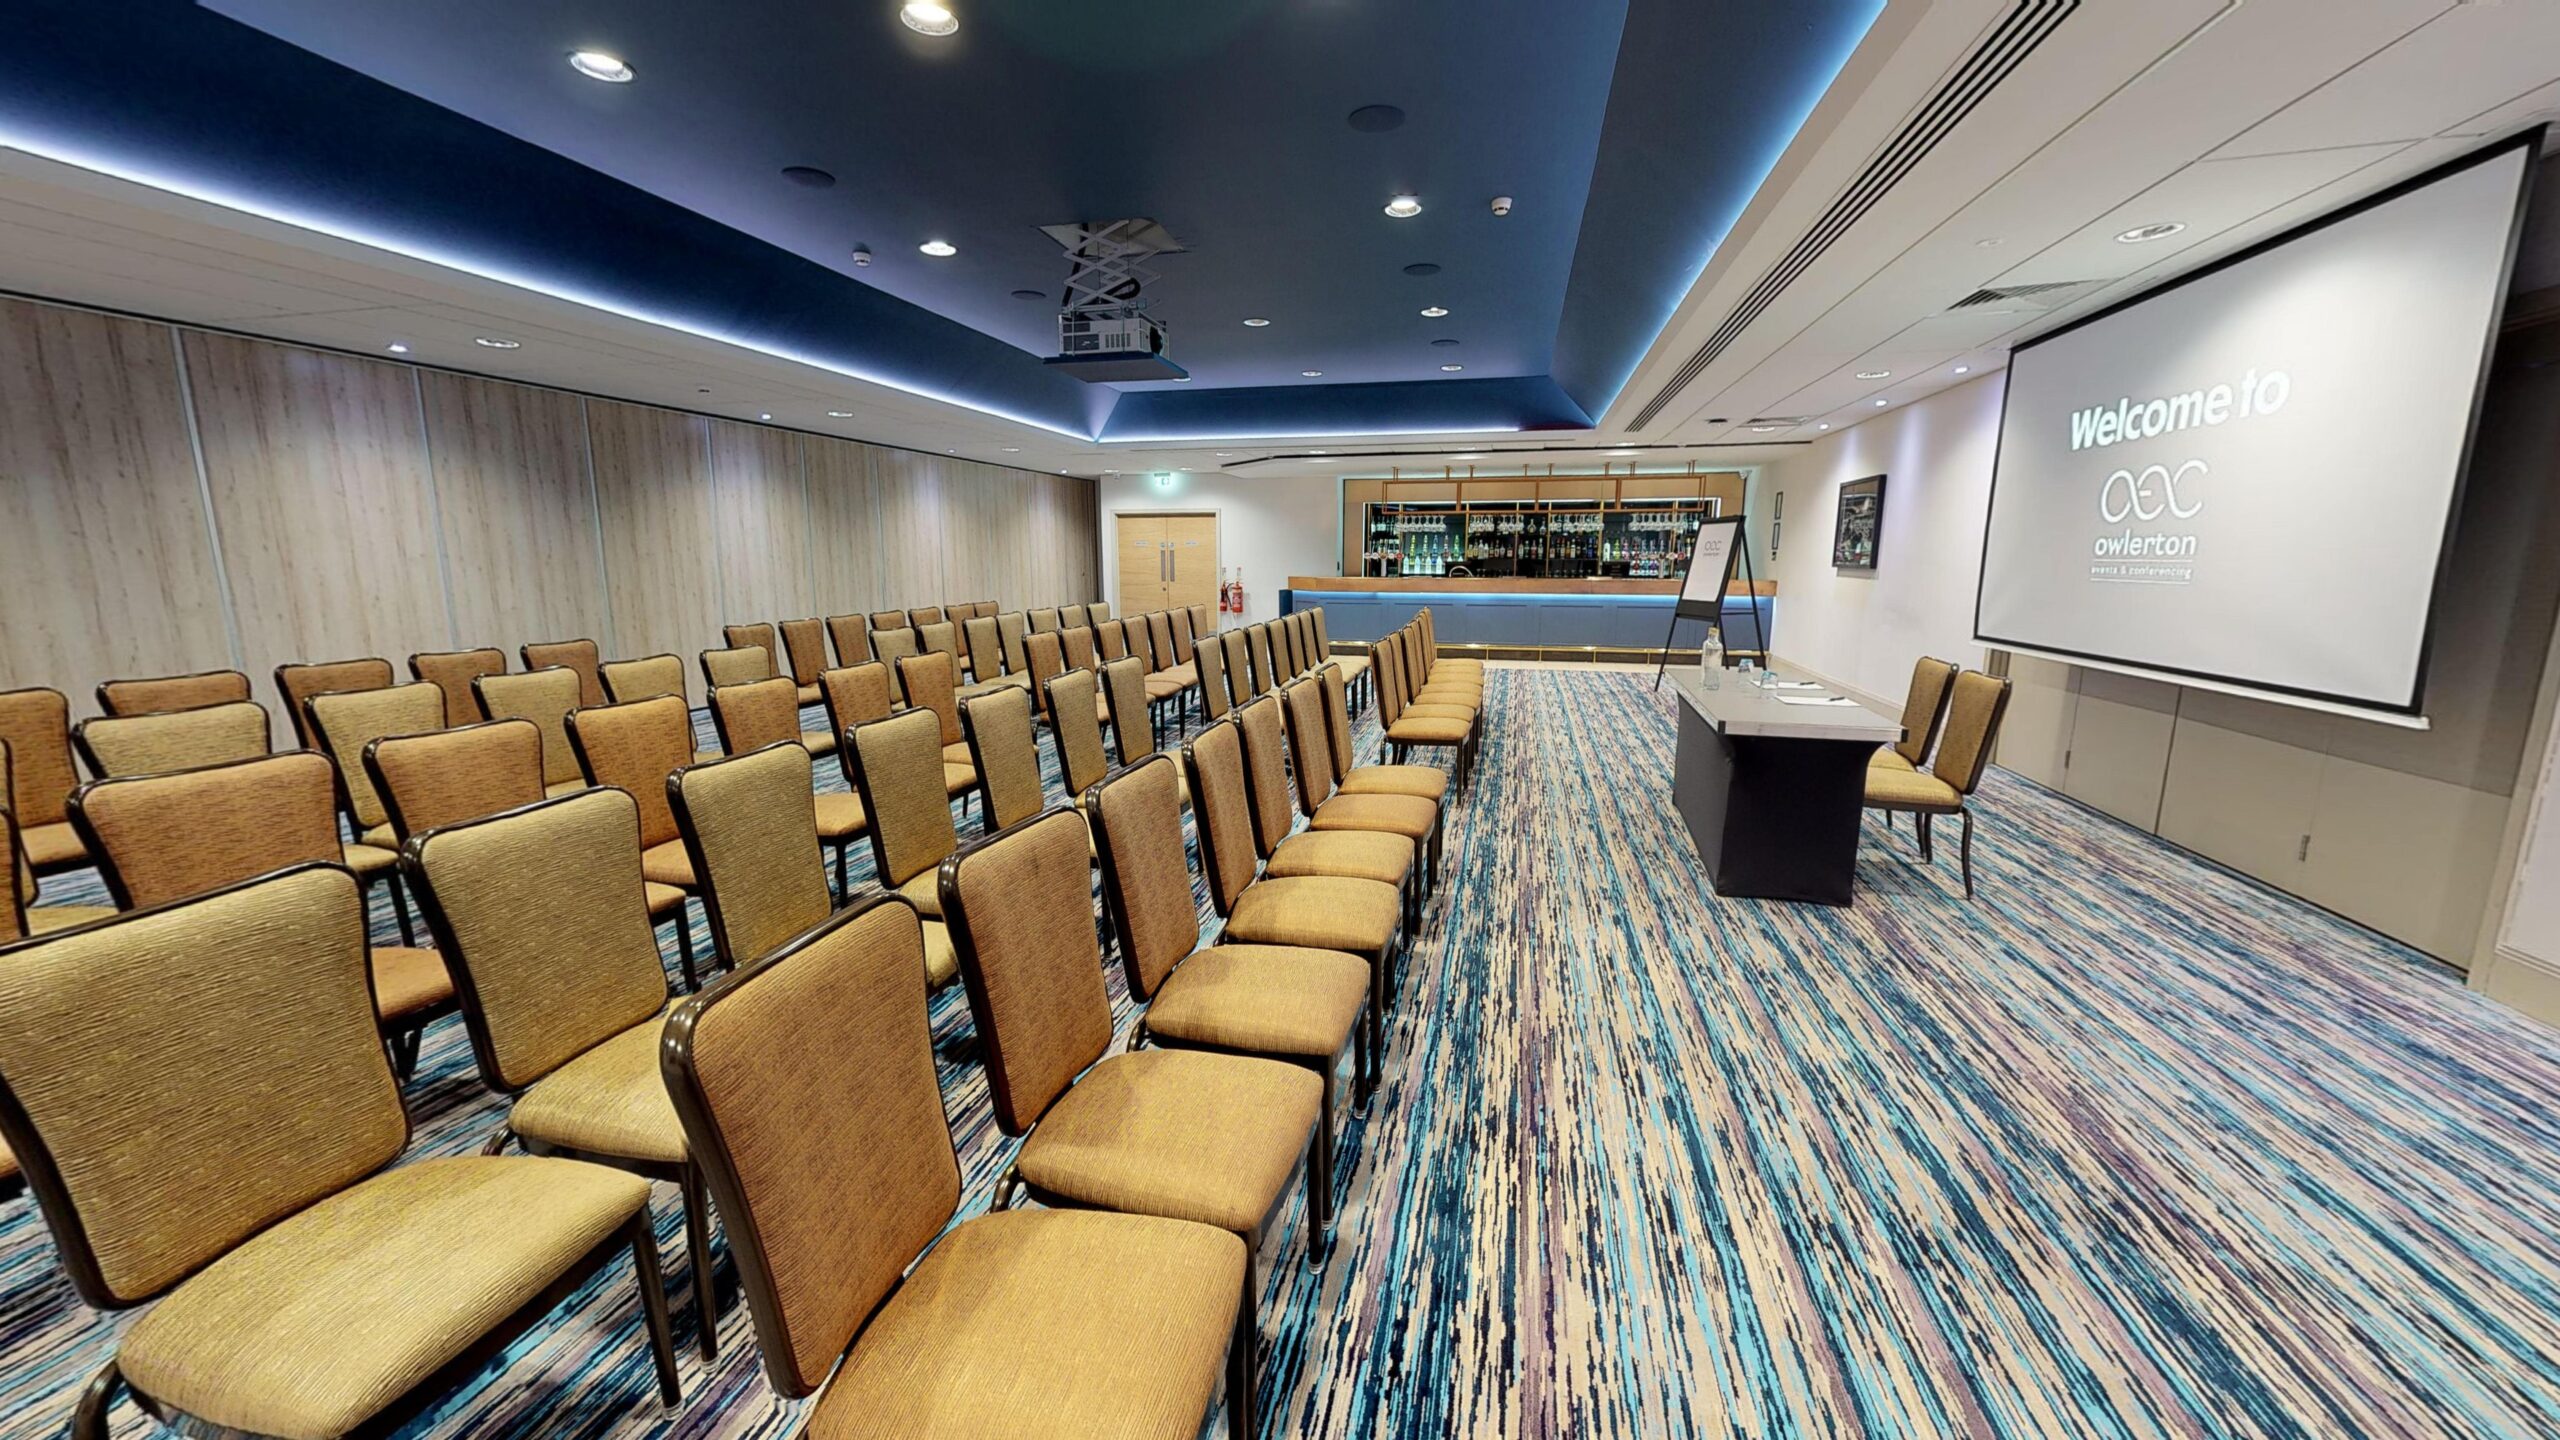 Conference Venue Hire - Conference Rooms to Hire - Conference Venue Sheffield - Conference Room Sheffield - OEC Sheffield